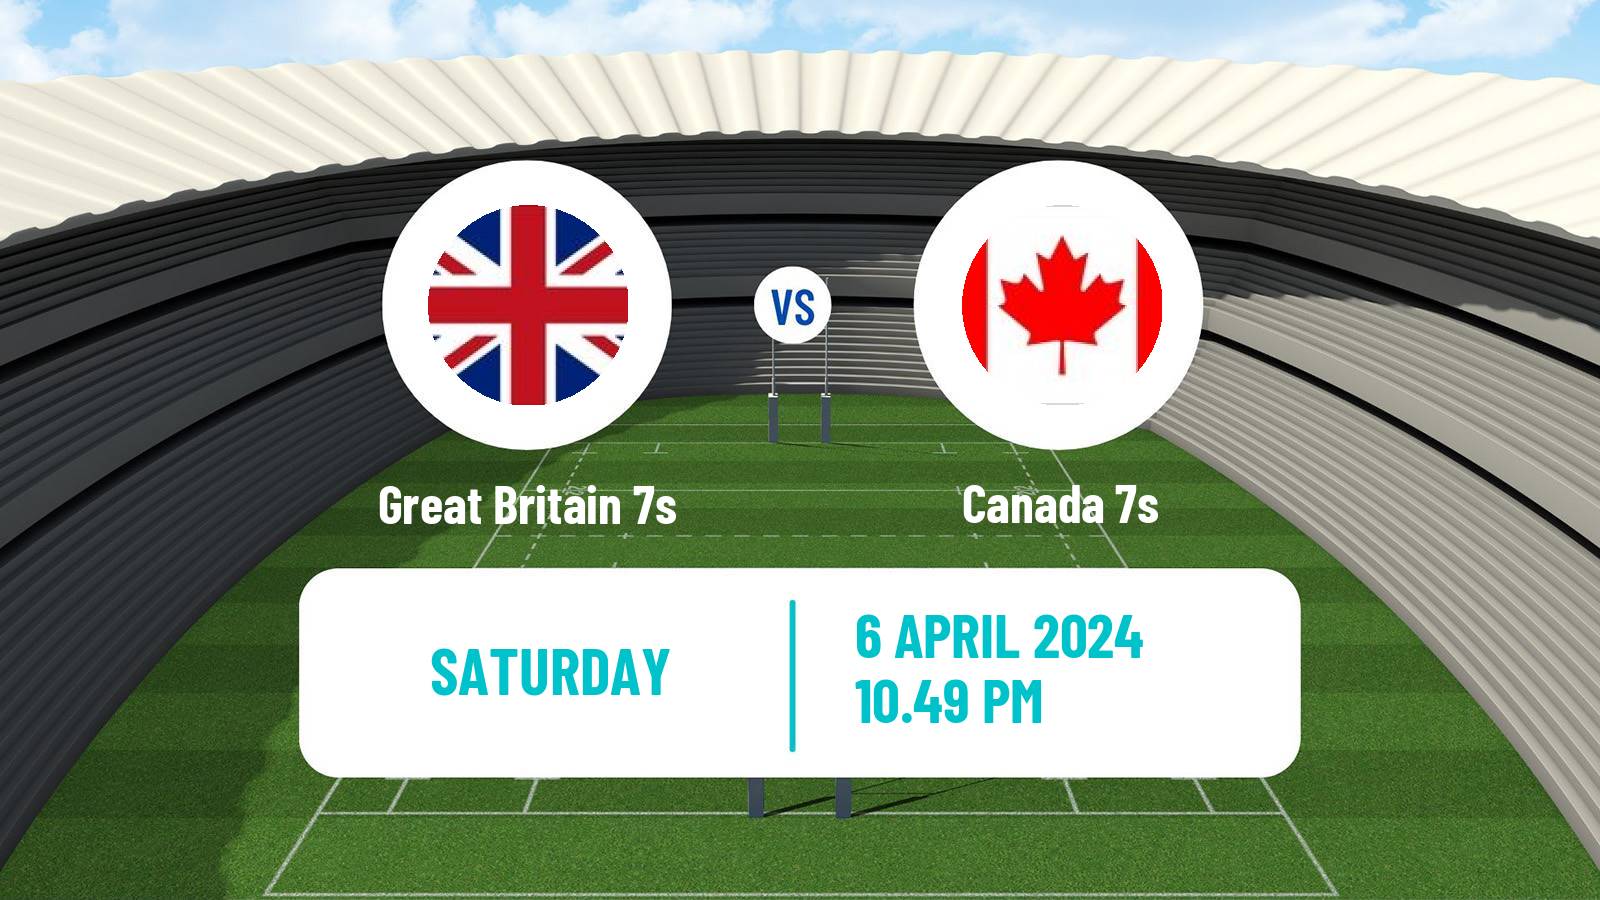 Rugby union Sevens World Series - Hong Kong Great Britain 7s - Canada 7s